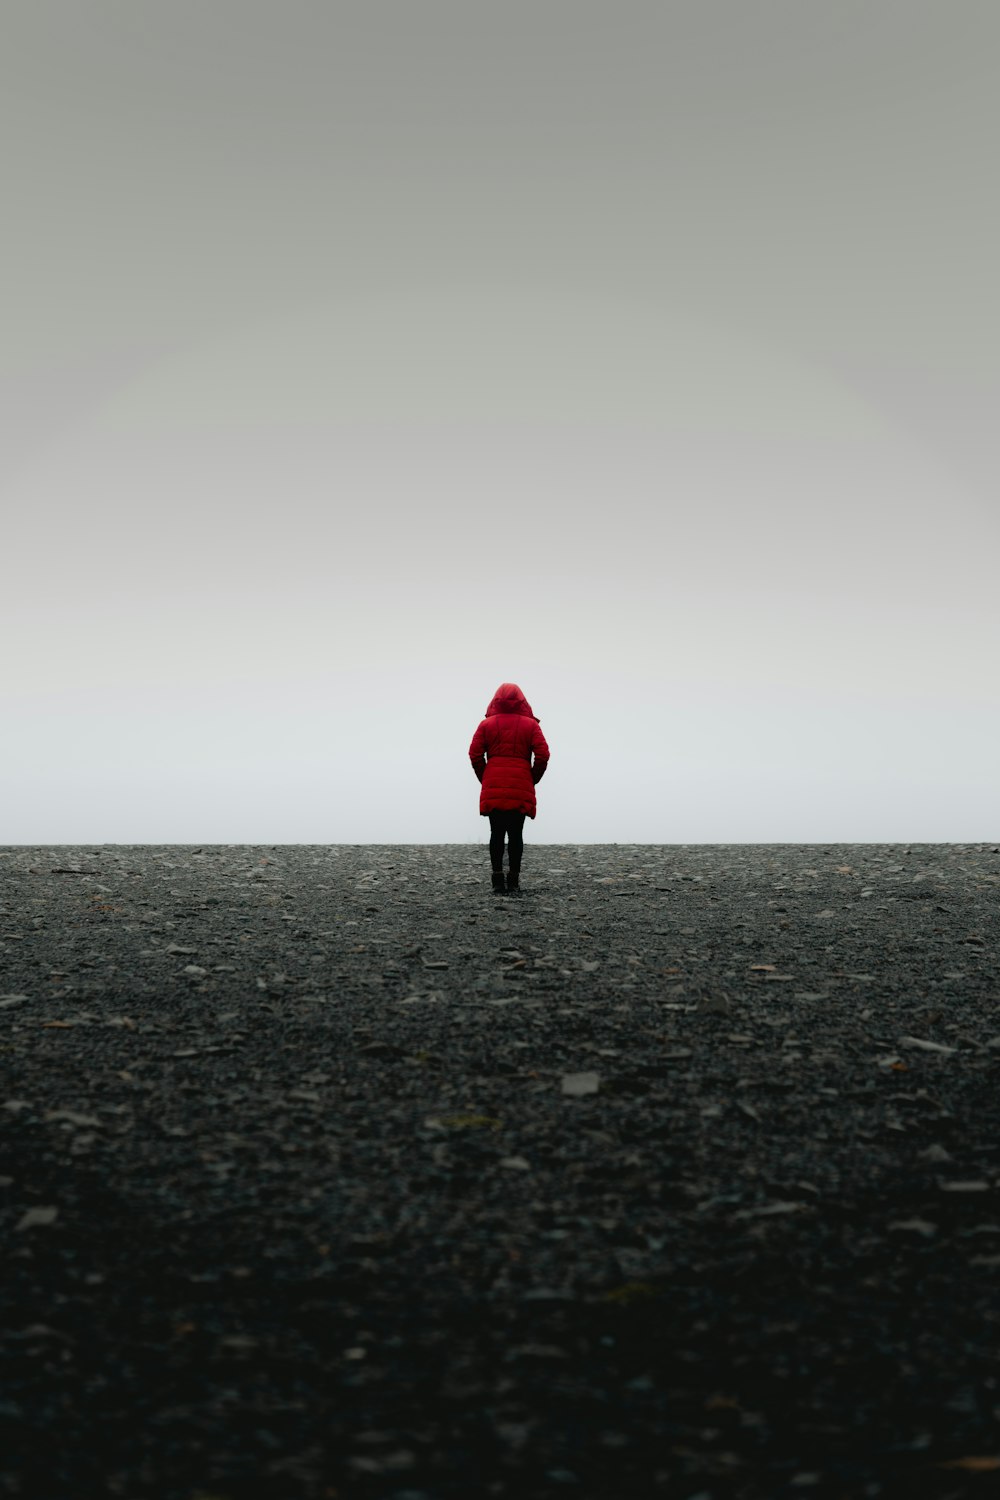 a person in a red jacket standing in a field